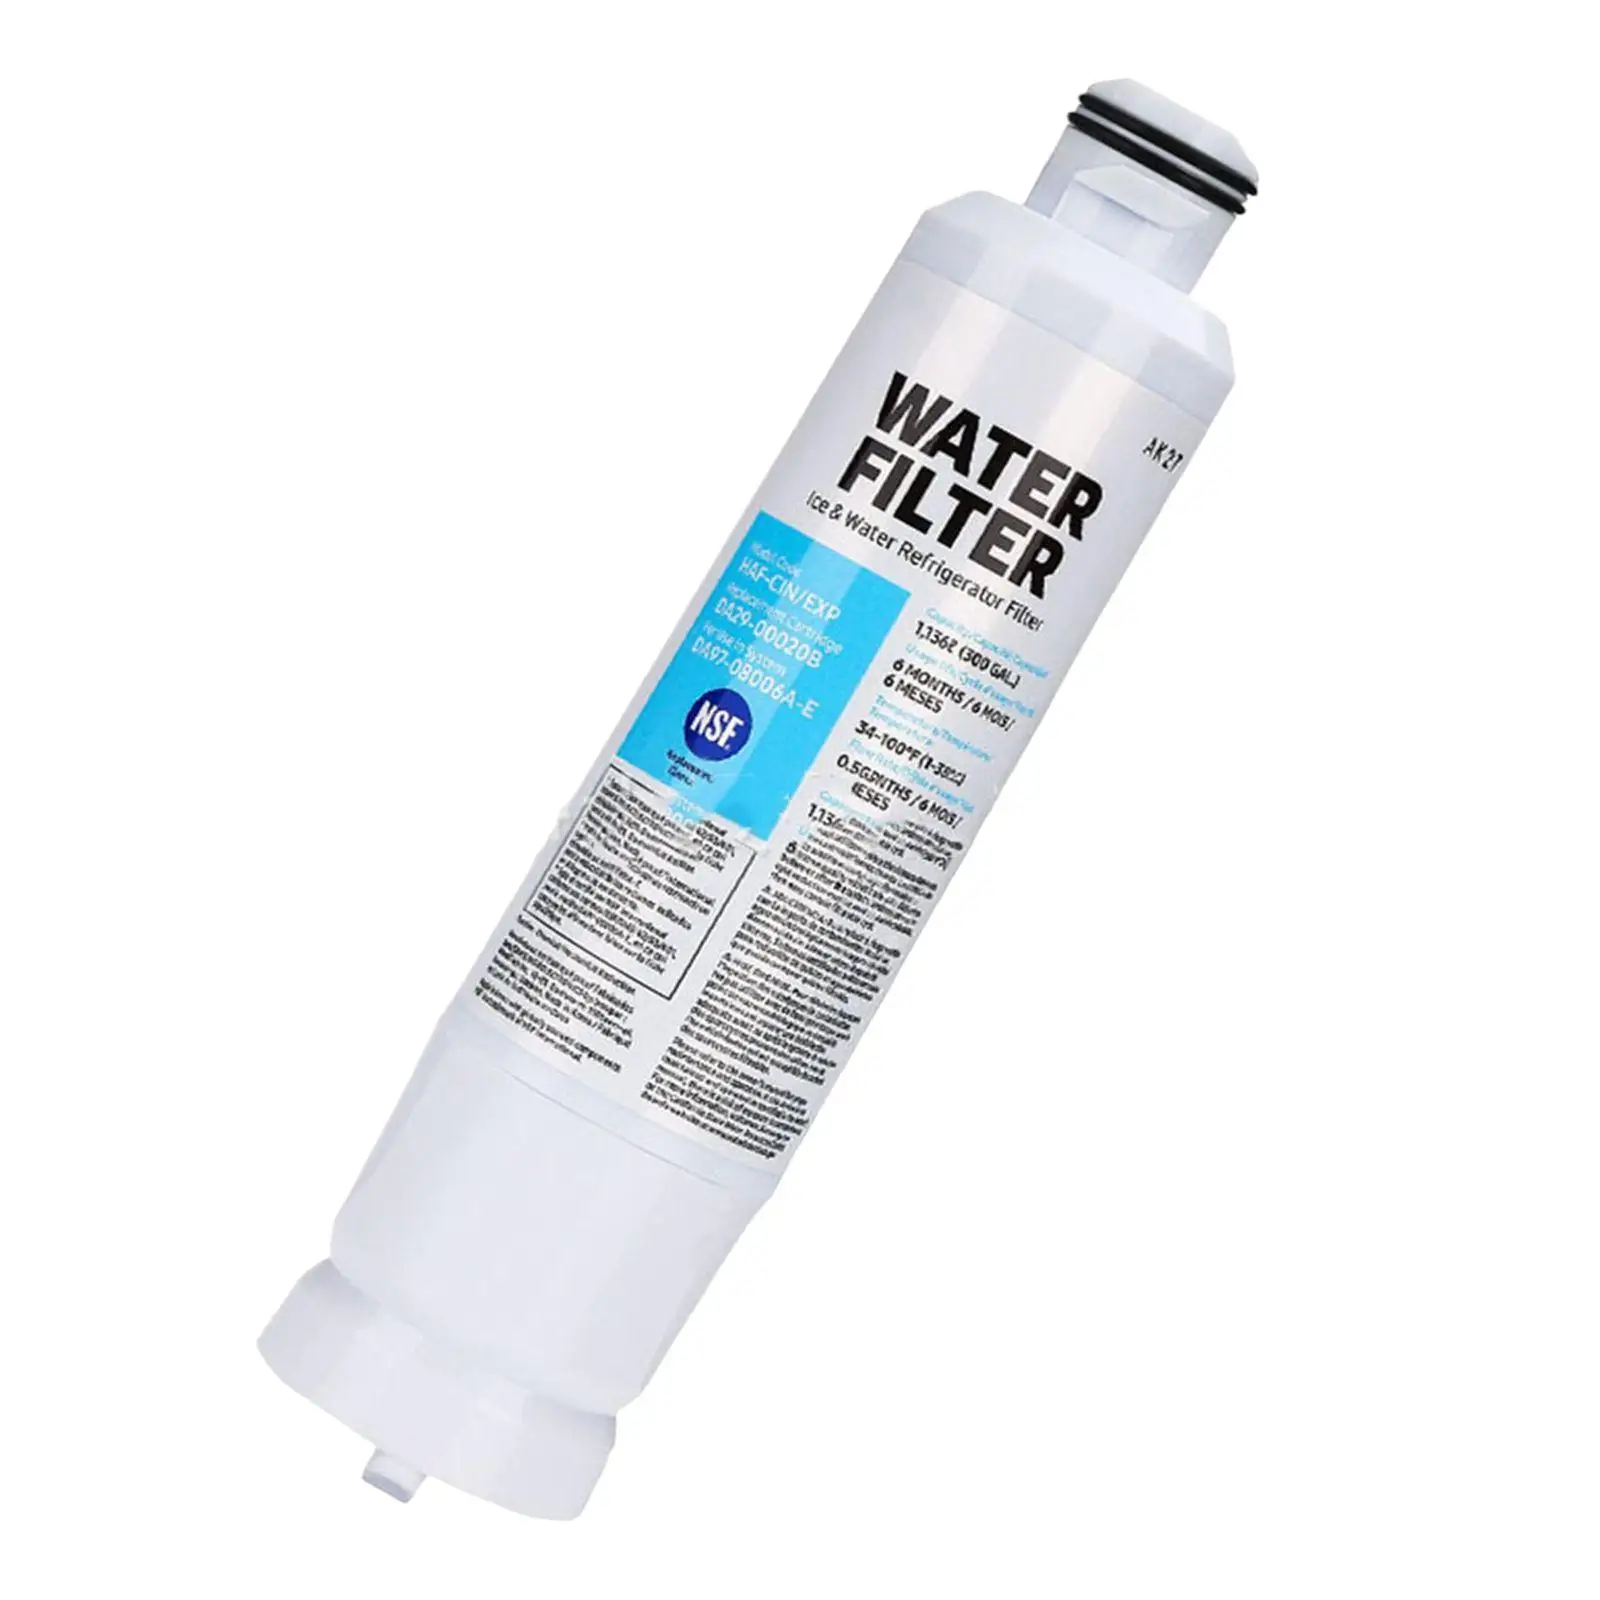 Refrigerator Water Filter Replacement Easy to Install Sealed Replaceable for da29 00020b Freezer Outdoor Travel Hotel Kitchen